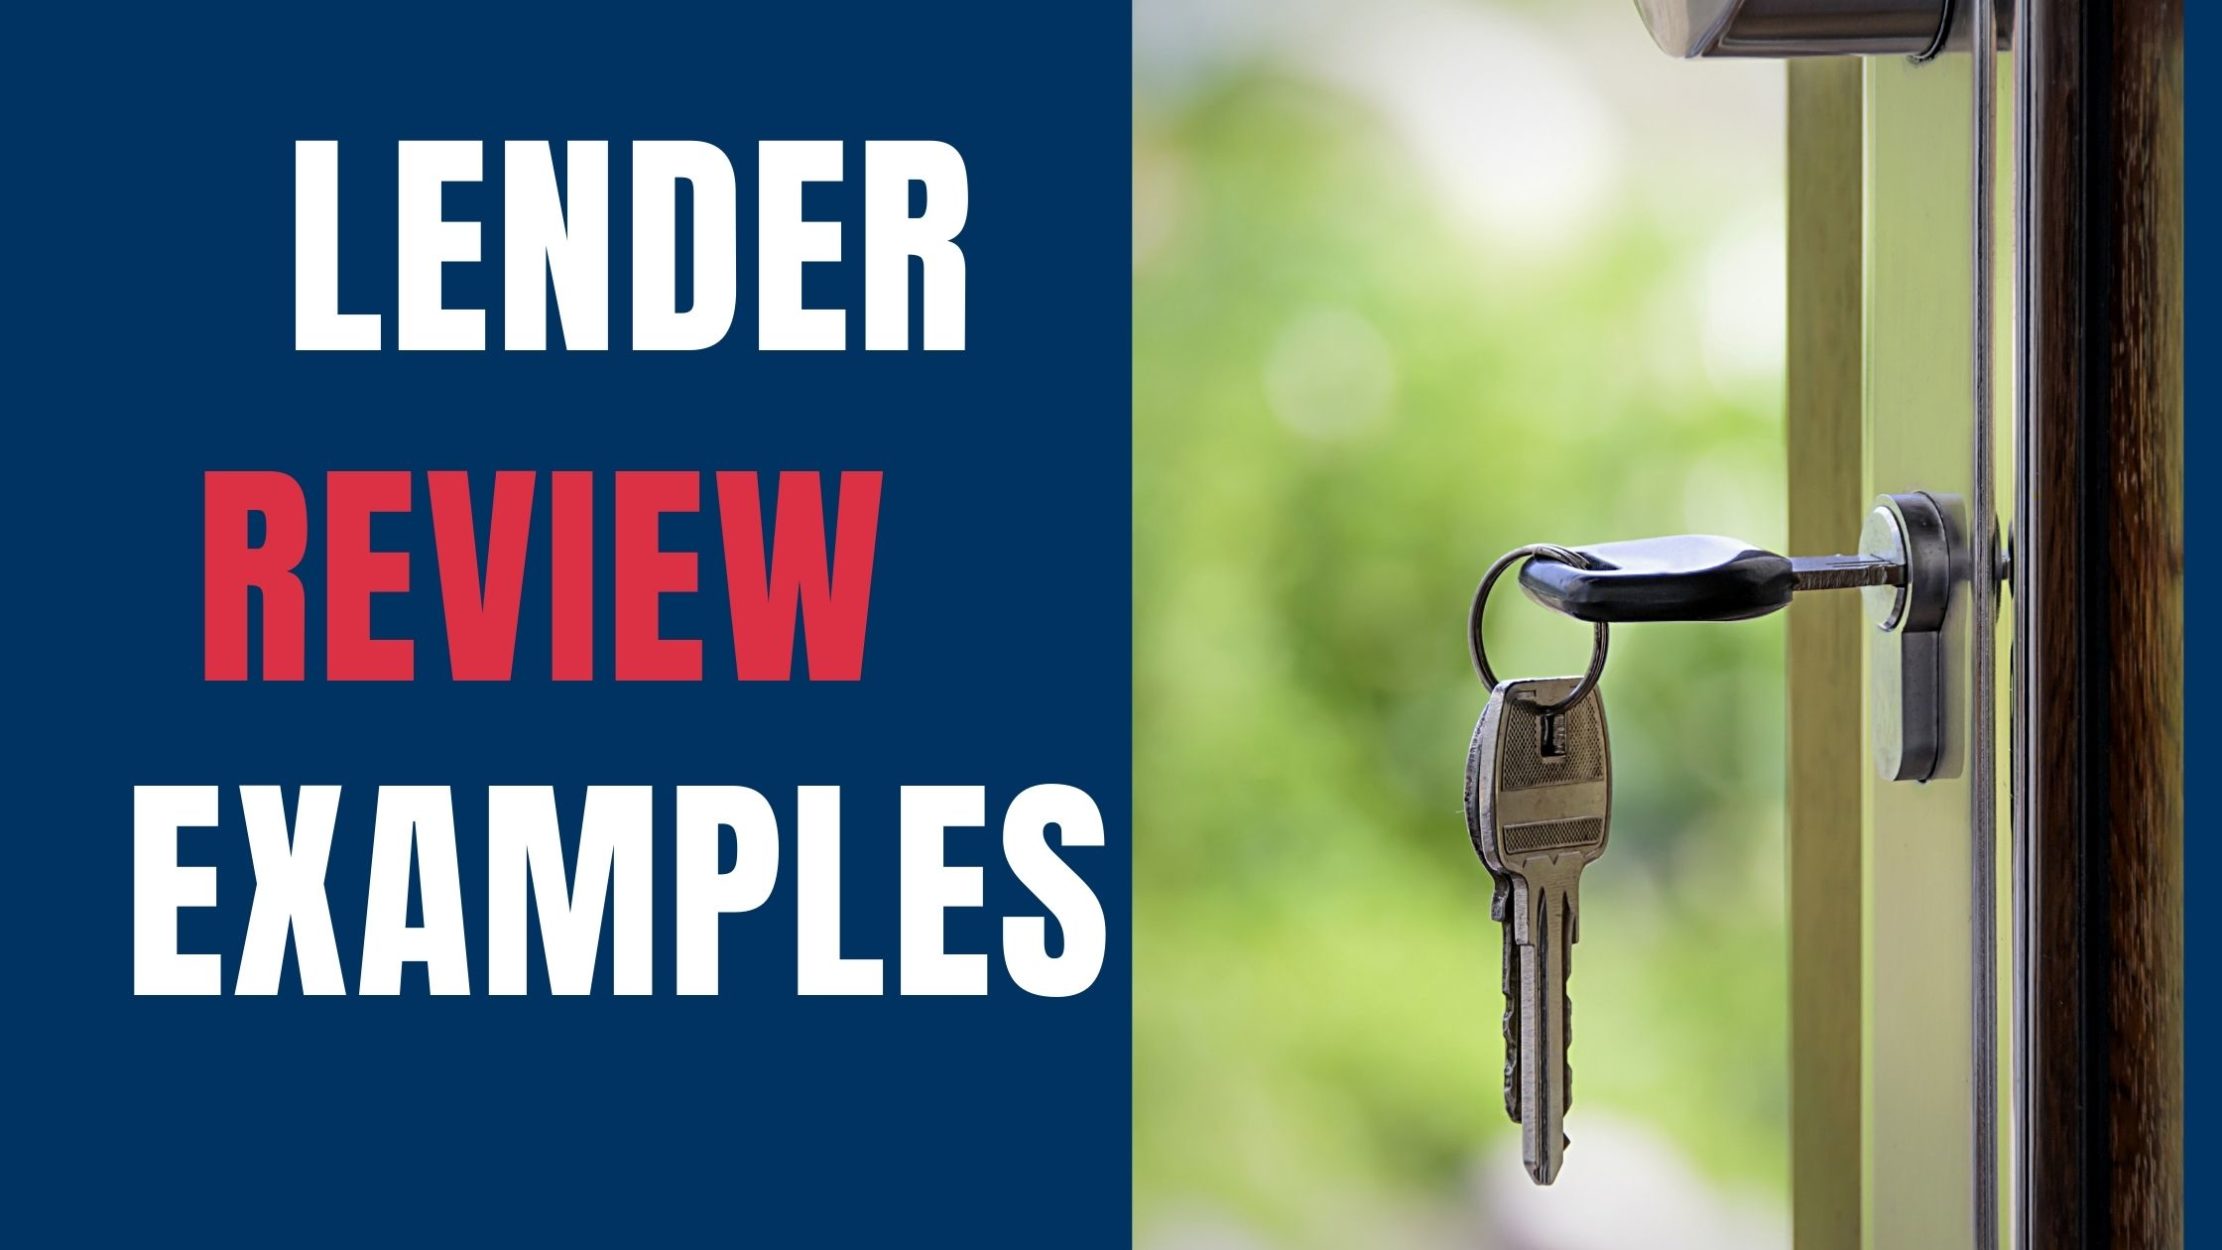 Lender review examples